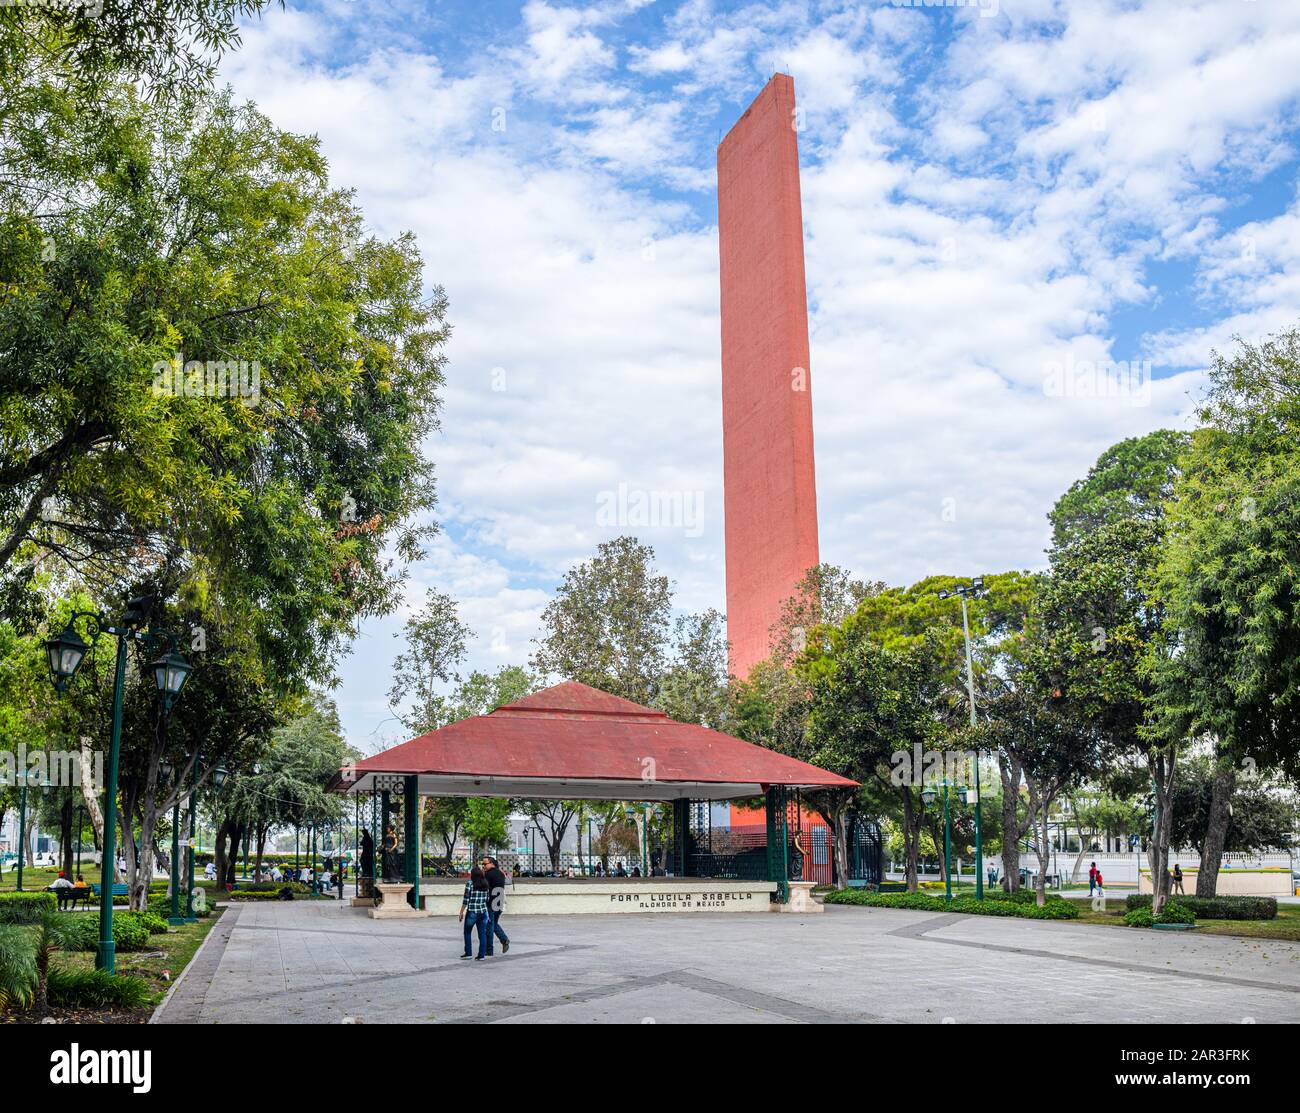 Monterrey, Nuevo Leon, Mexico - November 21, 2019: People walk by the Trade Lighthouse by Luis Barragan  in the Macroplaza Stock Photo